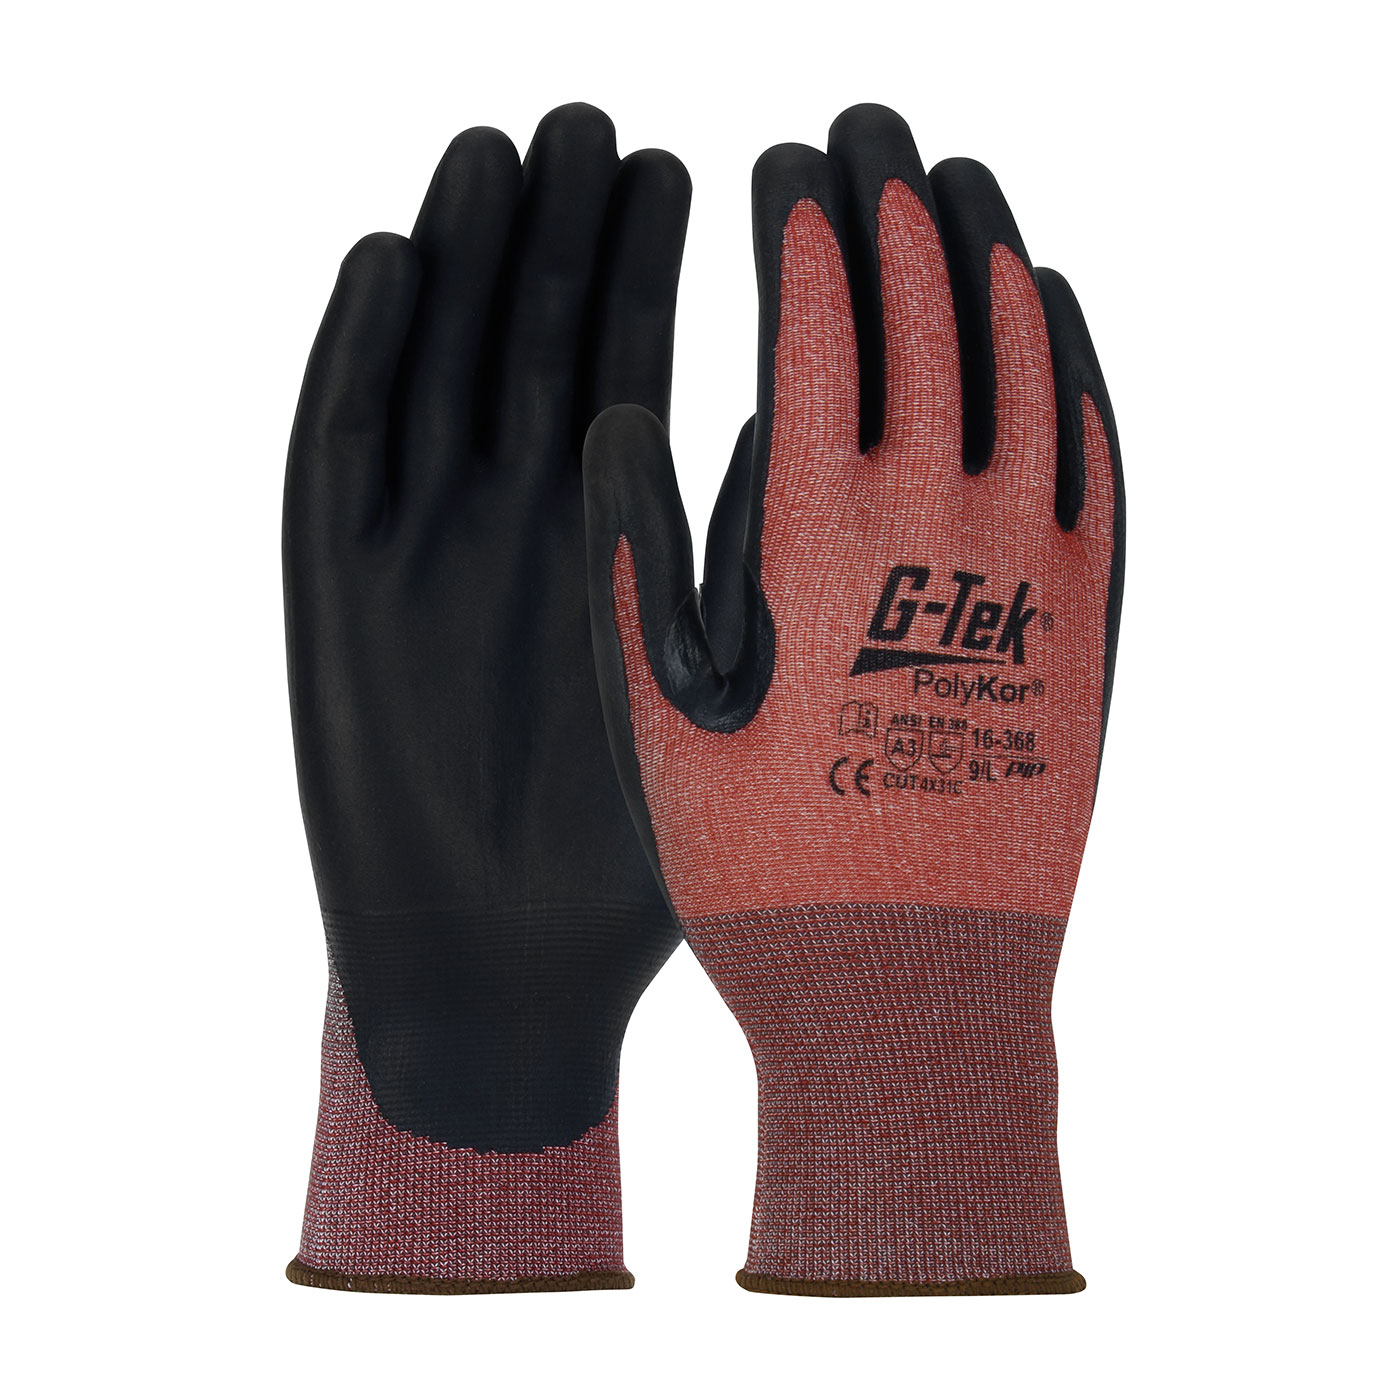 PIP 16-368/M G-Tek PolyKor X7 Seamless Knit PolyKor X7 Blended Glove with NeoFoam Coated Palm & Fingers - Touchscreen Compatible - Medium PID-16368M